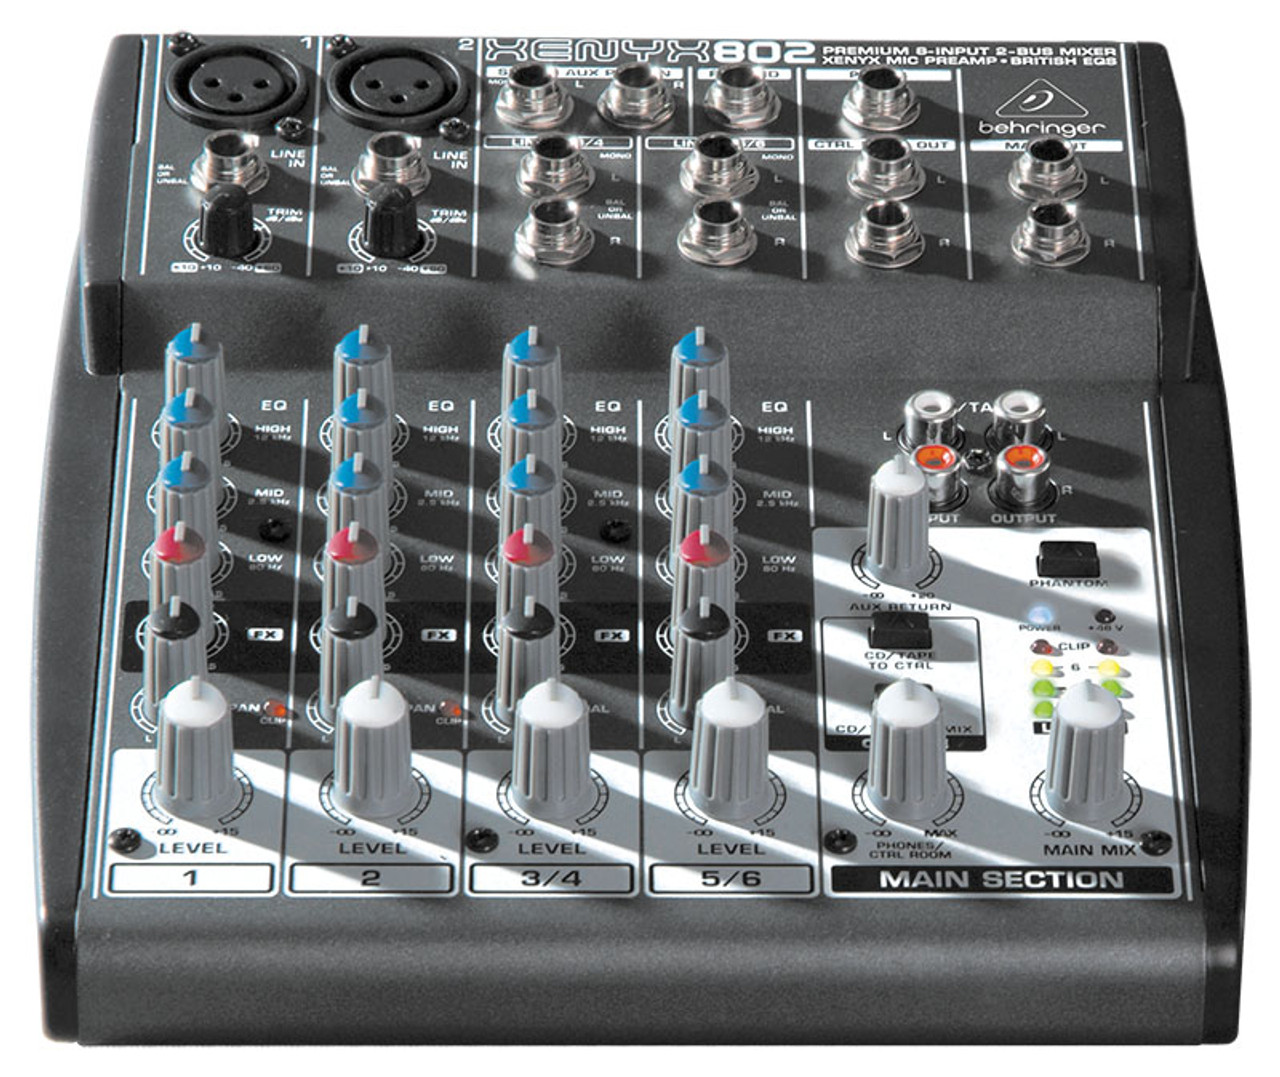 Behringer Behringer Premium 8 Input 2 Bus Mixer with XENYX Mic Preamps/Compressors/British 